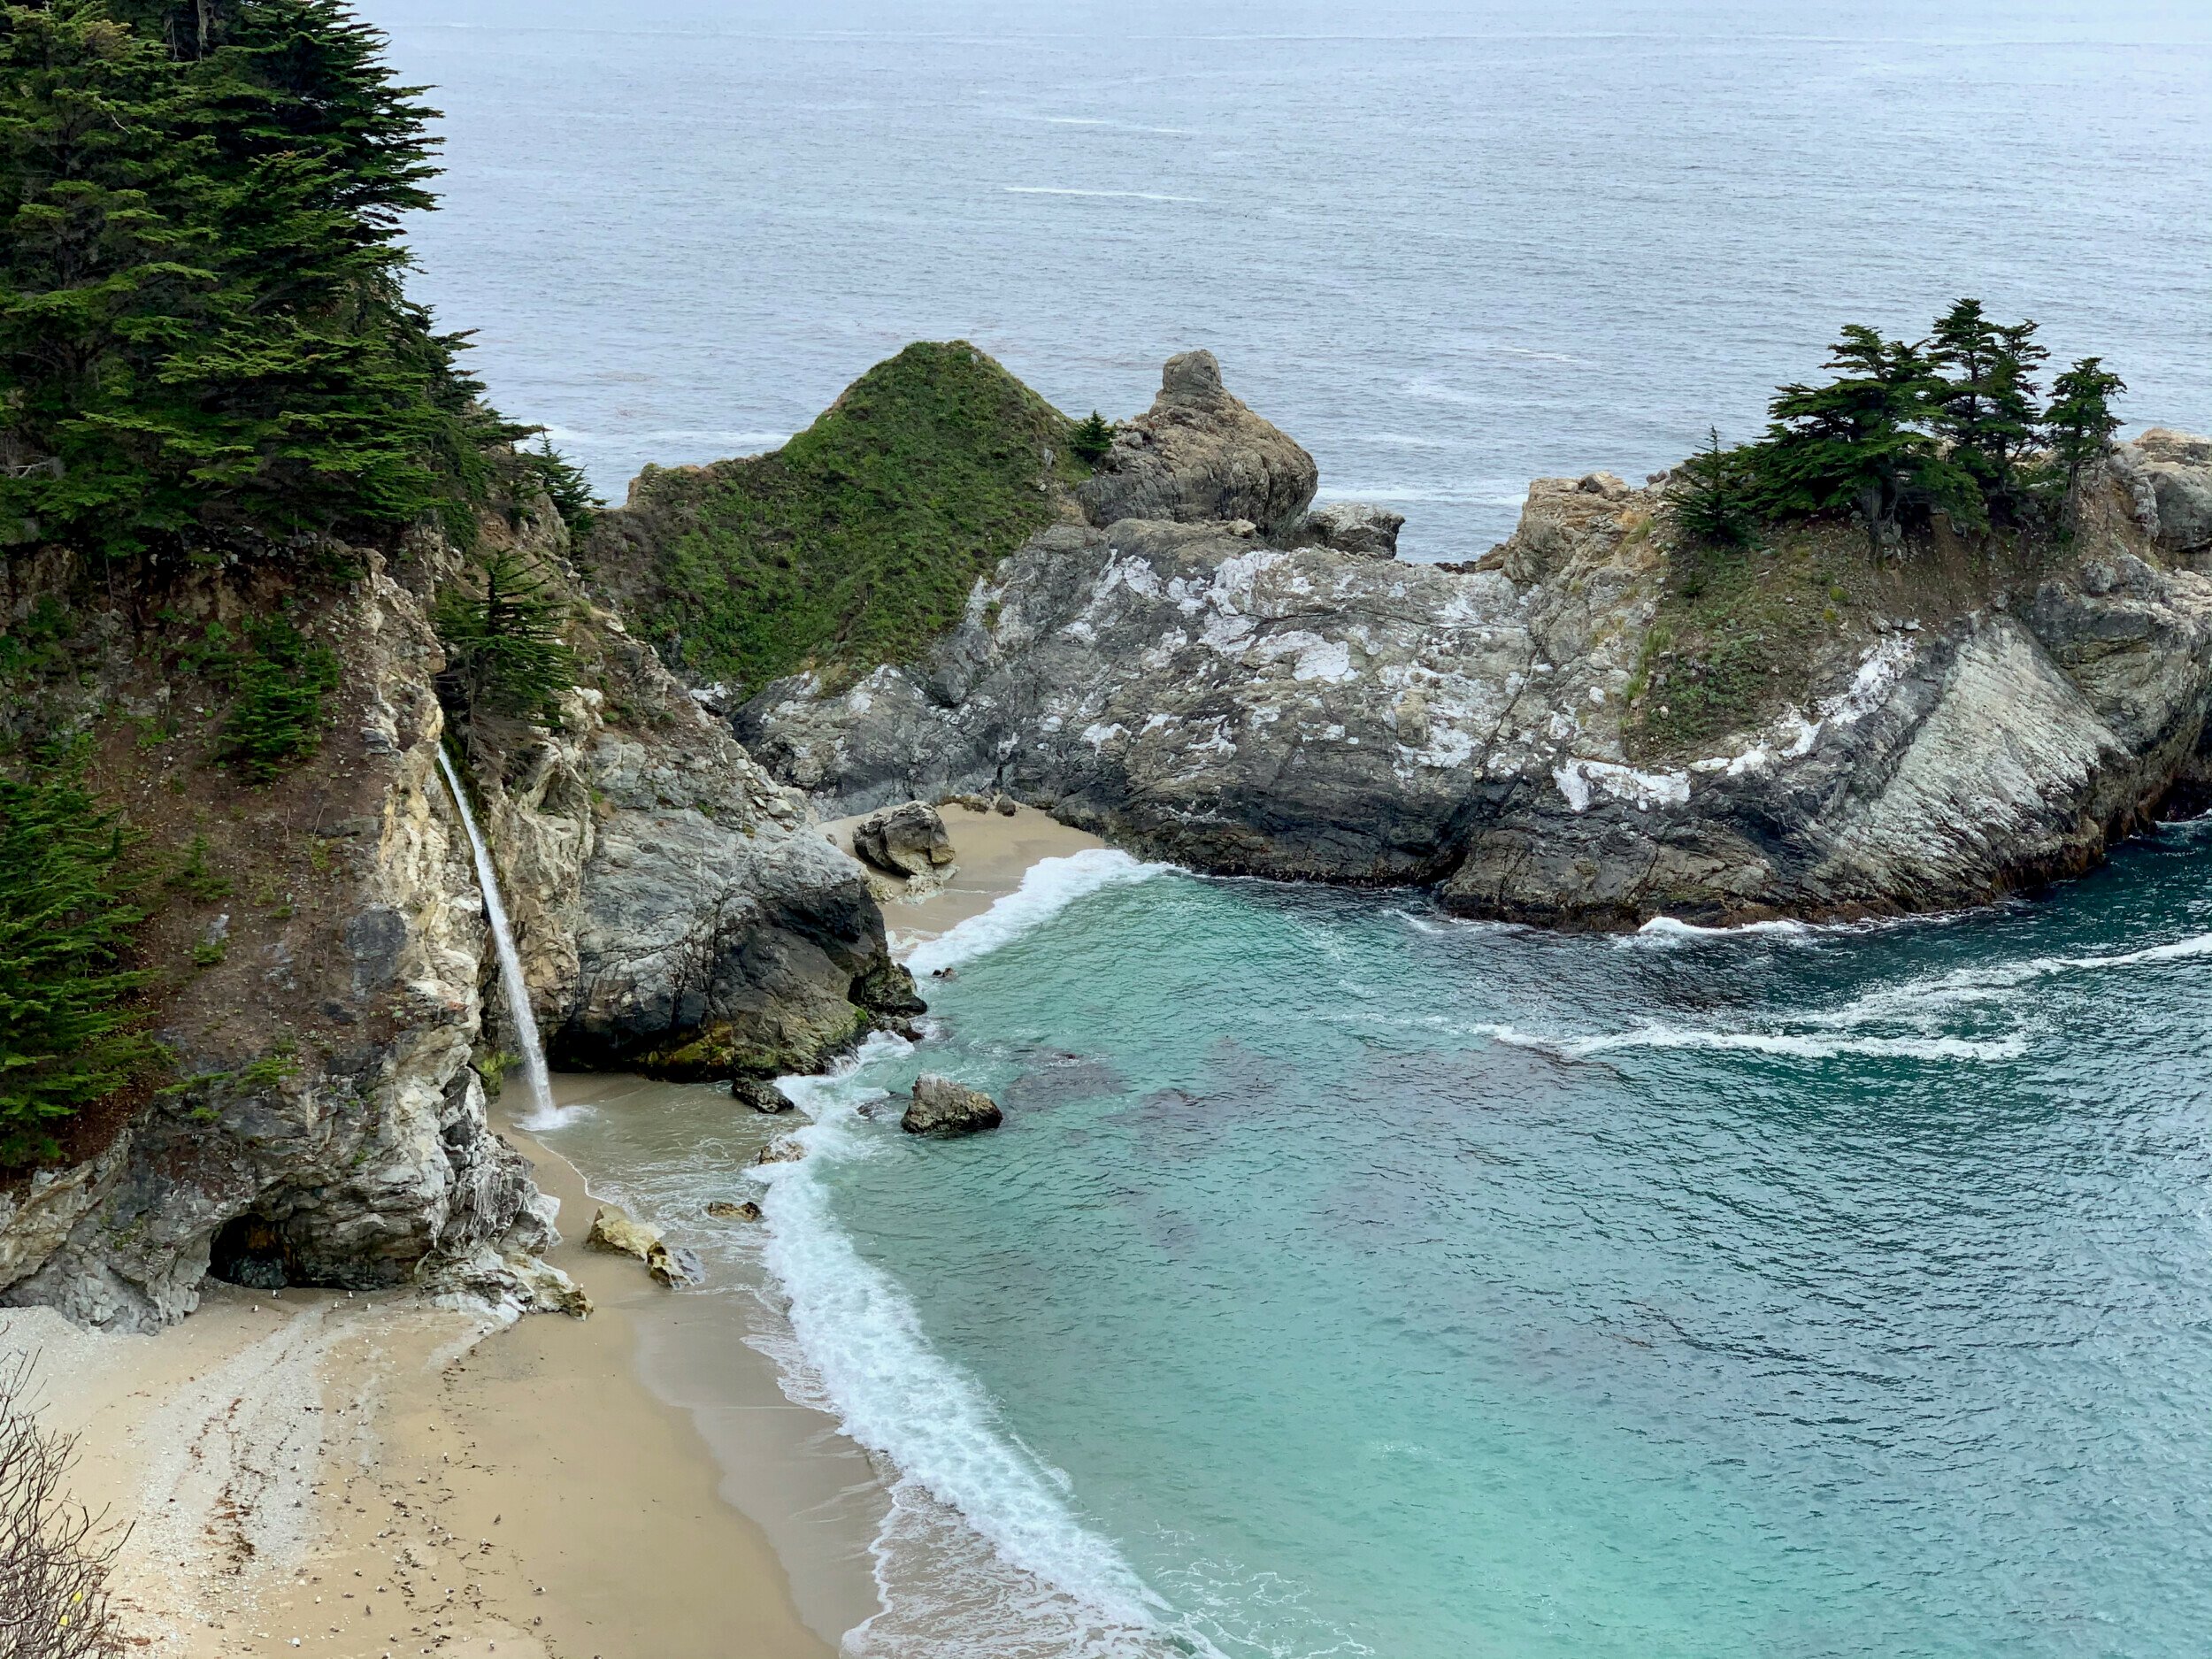 McWay Falls flowing into the turquoise sea surrounded by rugged cliffs and rich greenery, Big Sur, California